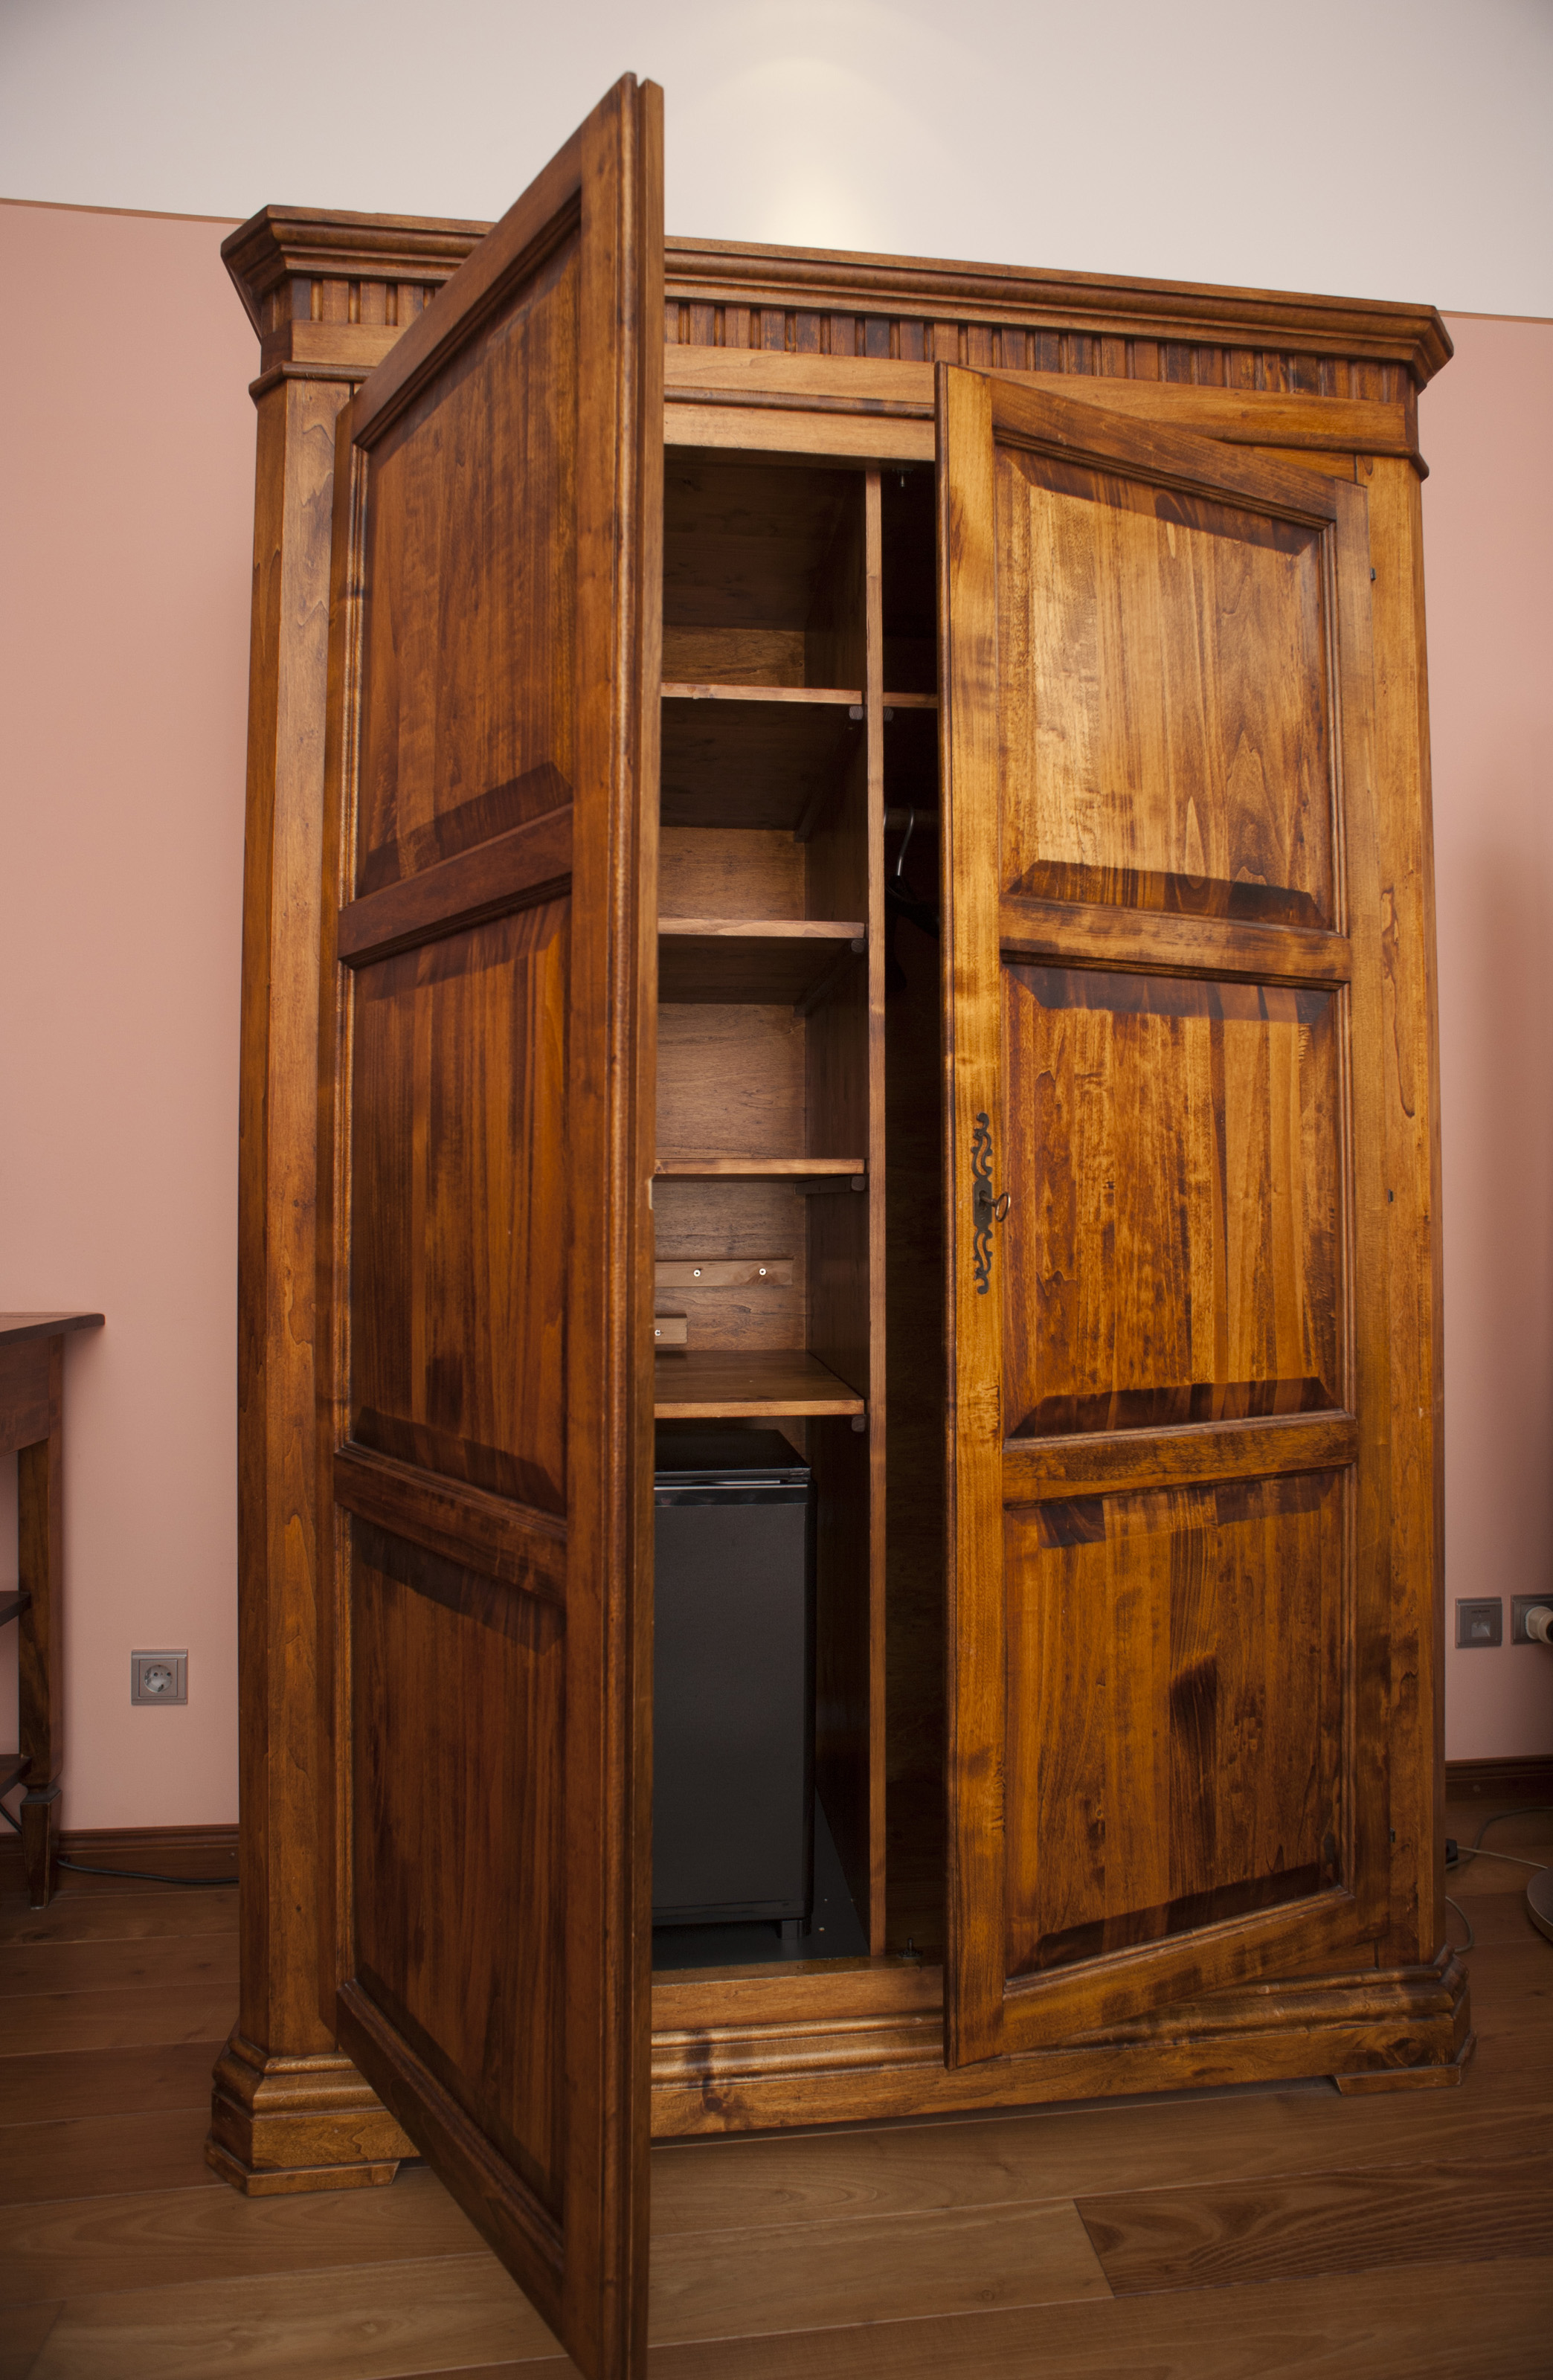 Free Stock Photo 8923 Old wooden wardrobe or armoire  freeimageslive